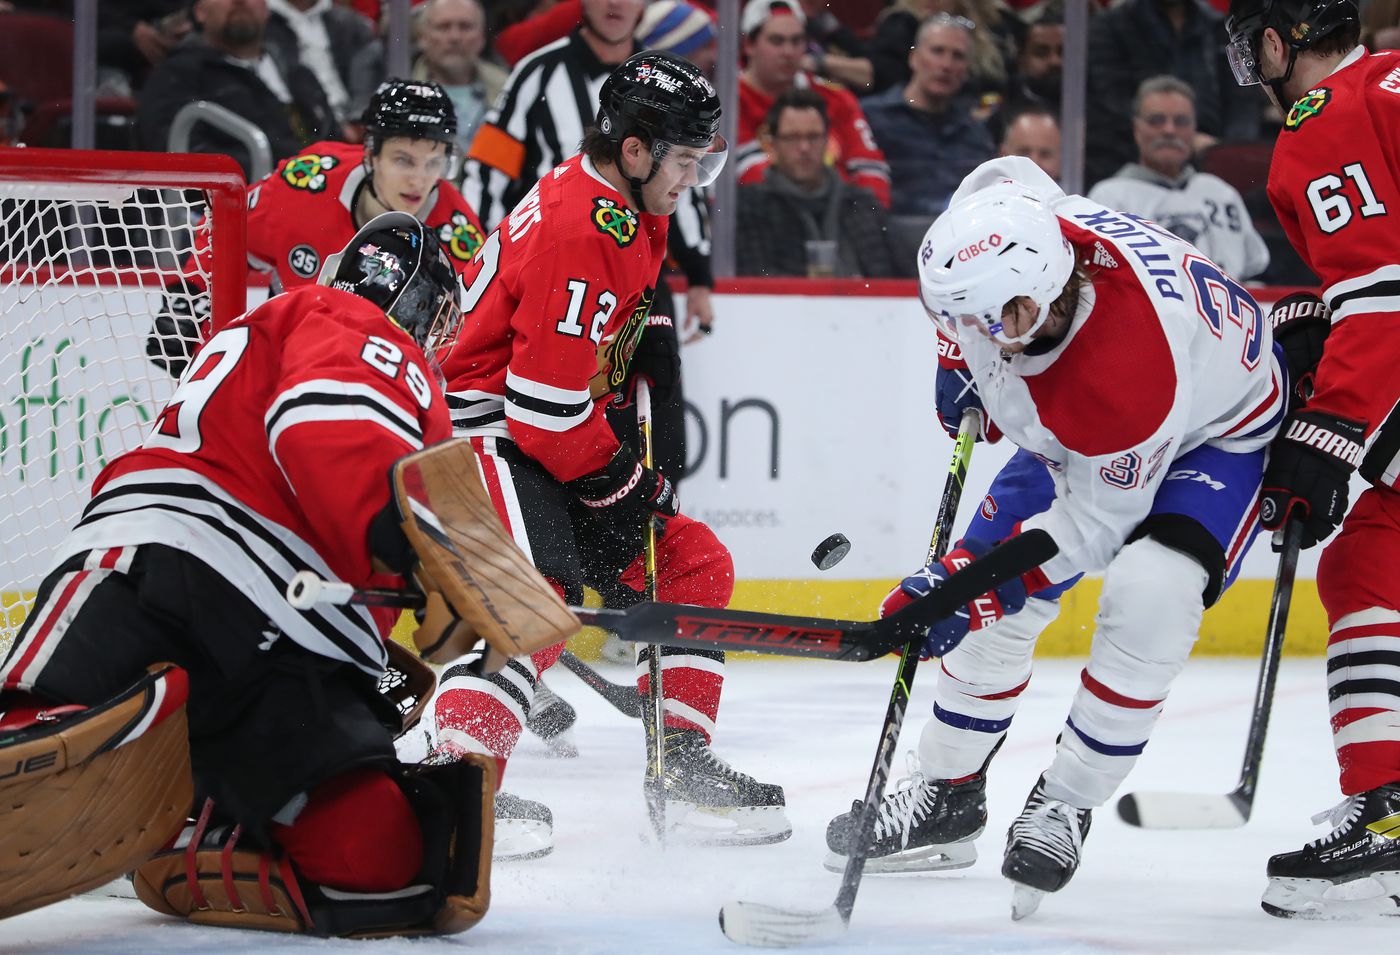 Chicago Blackhawks left wing Alex DeBrincat (12) handles the puck in the second period against the Montreal Canadiens at United Center on Jan. 13, 2022, in Chicago.